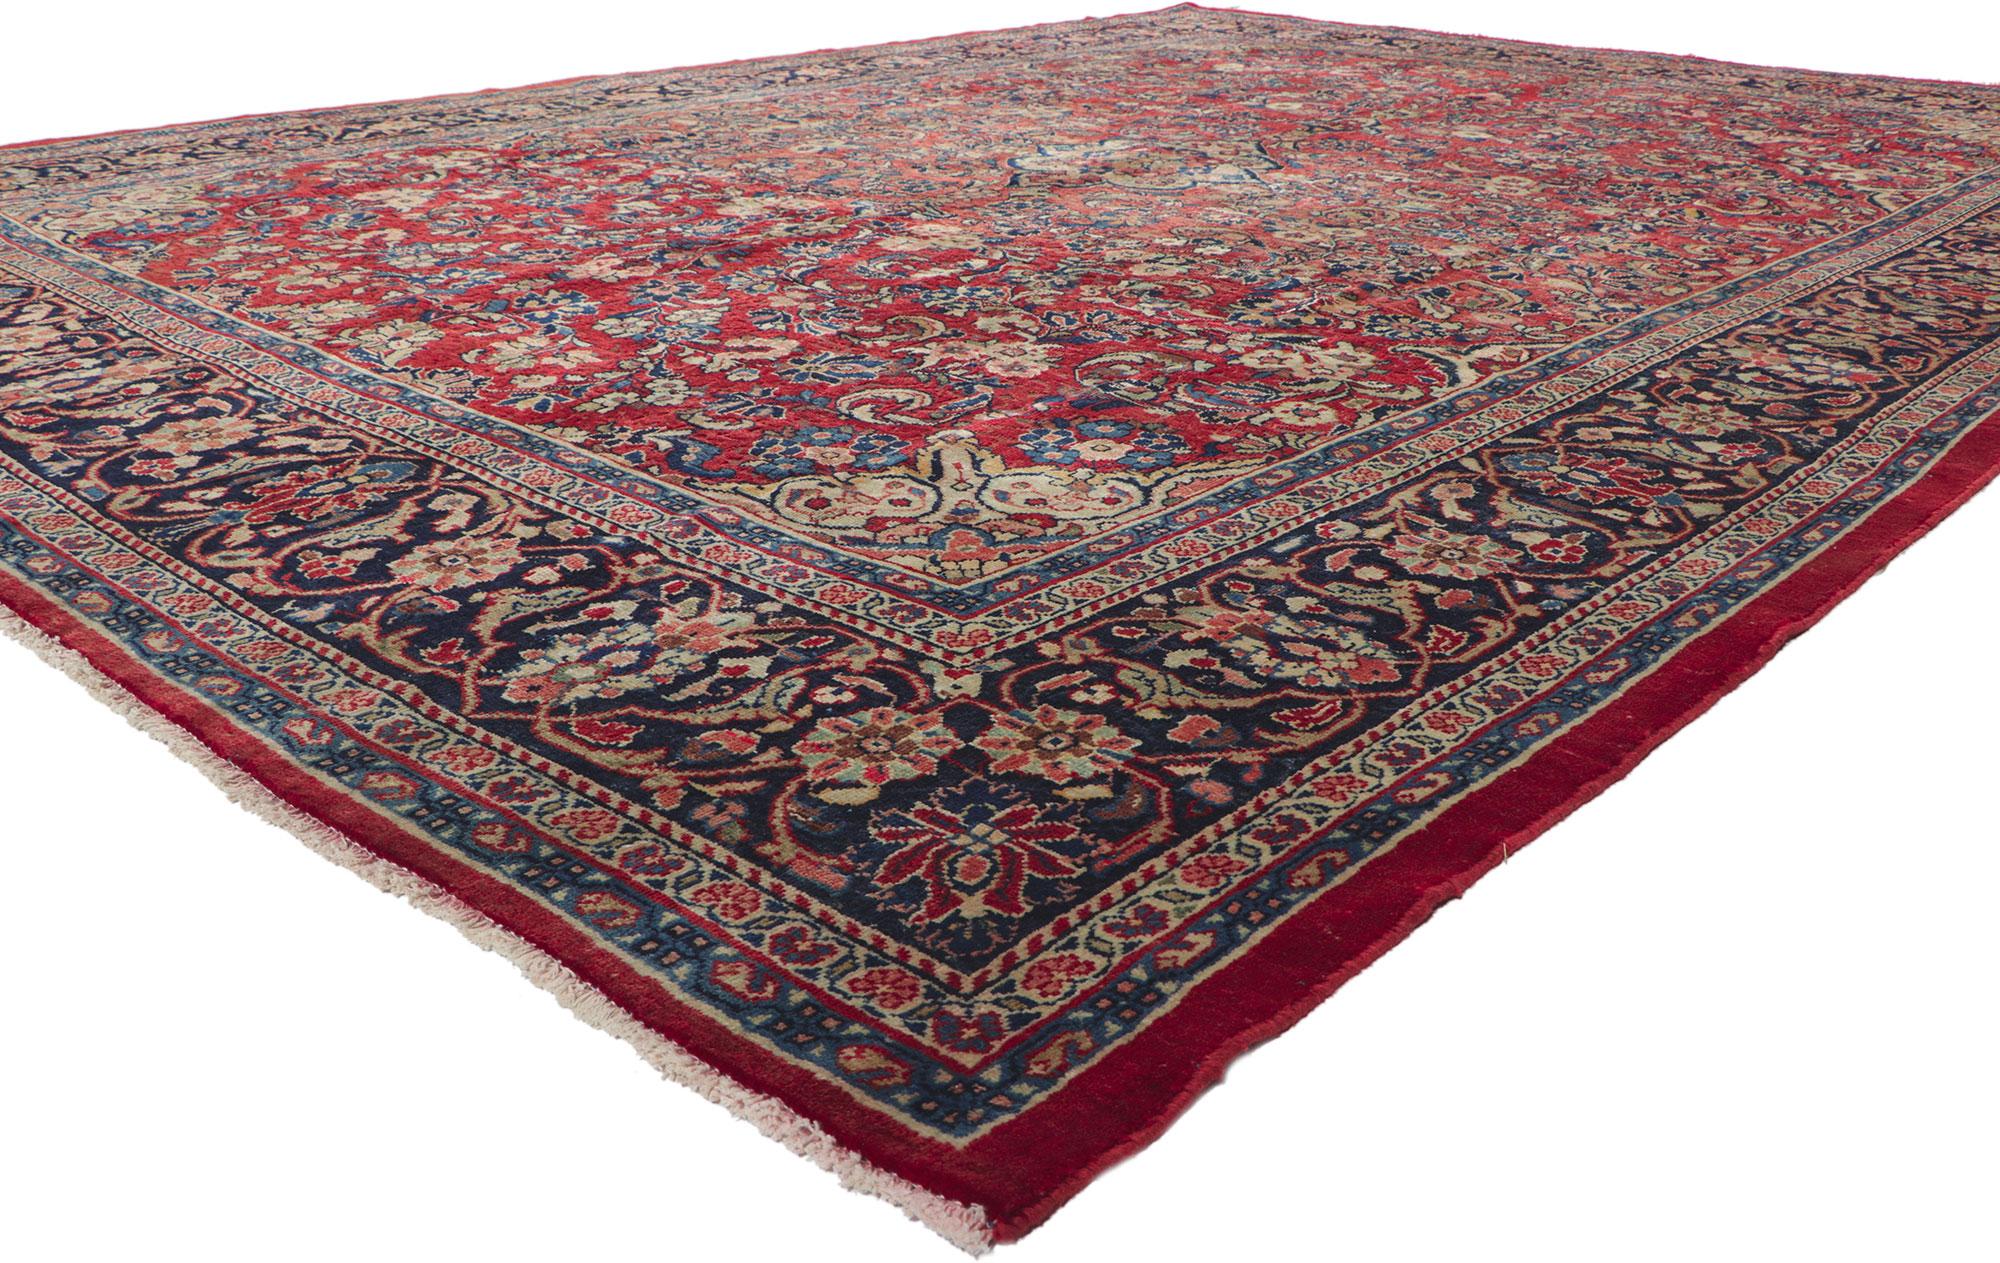 ?61205 vintage Persian Mahal rug, 10'03 x 14'02.
?With its beguiling ornamental elements, incredible detail and texture, this hand knotted wool vintage Persian Mahal rug is a captivating vision of woven beauty. The timeless botanical design and